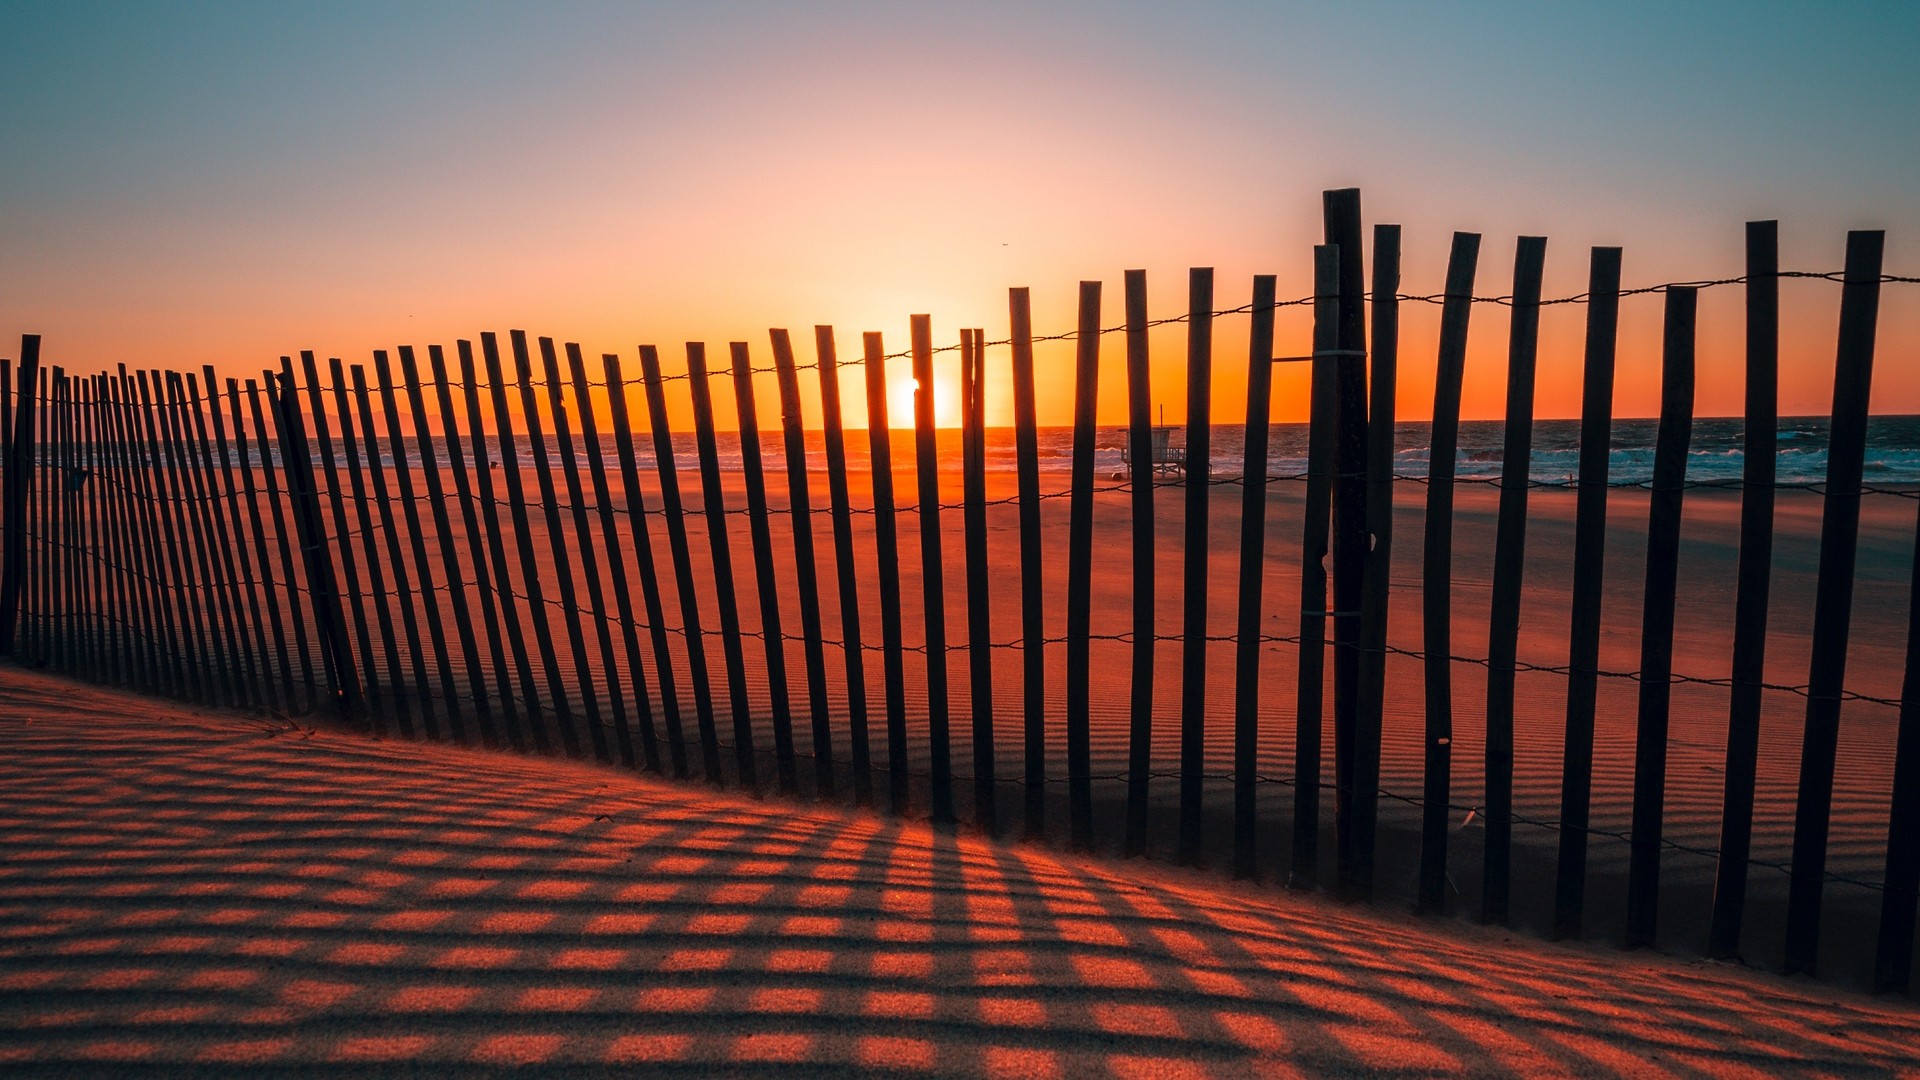 1920x1080 wallpapers: fence, shadows, sunset, sand, stunning photo (image)